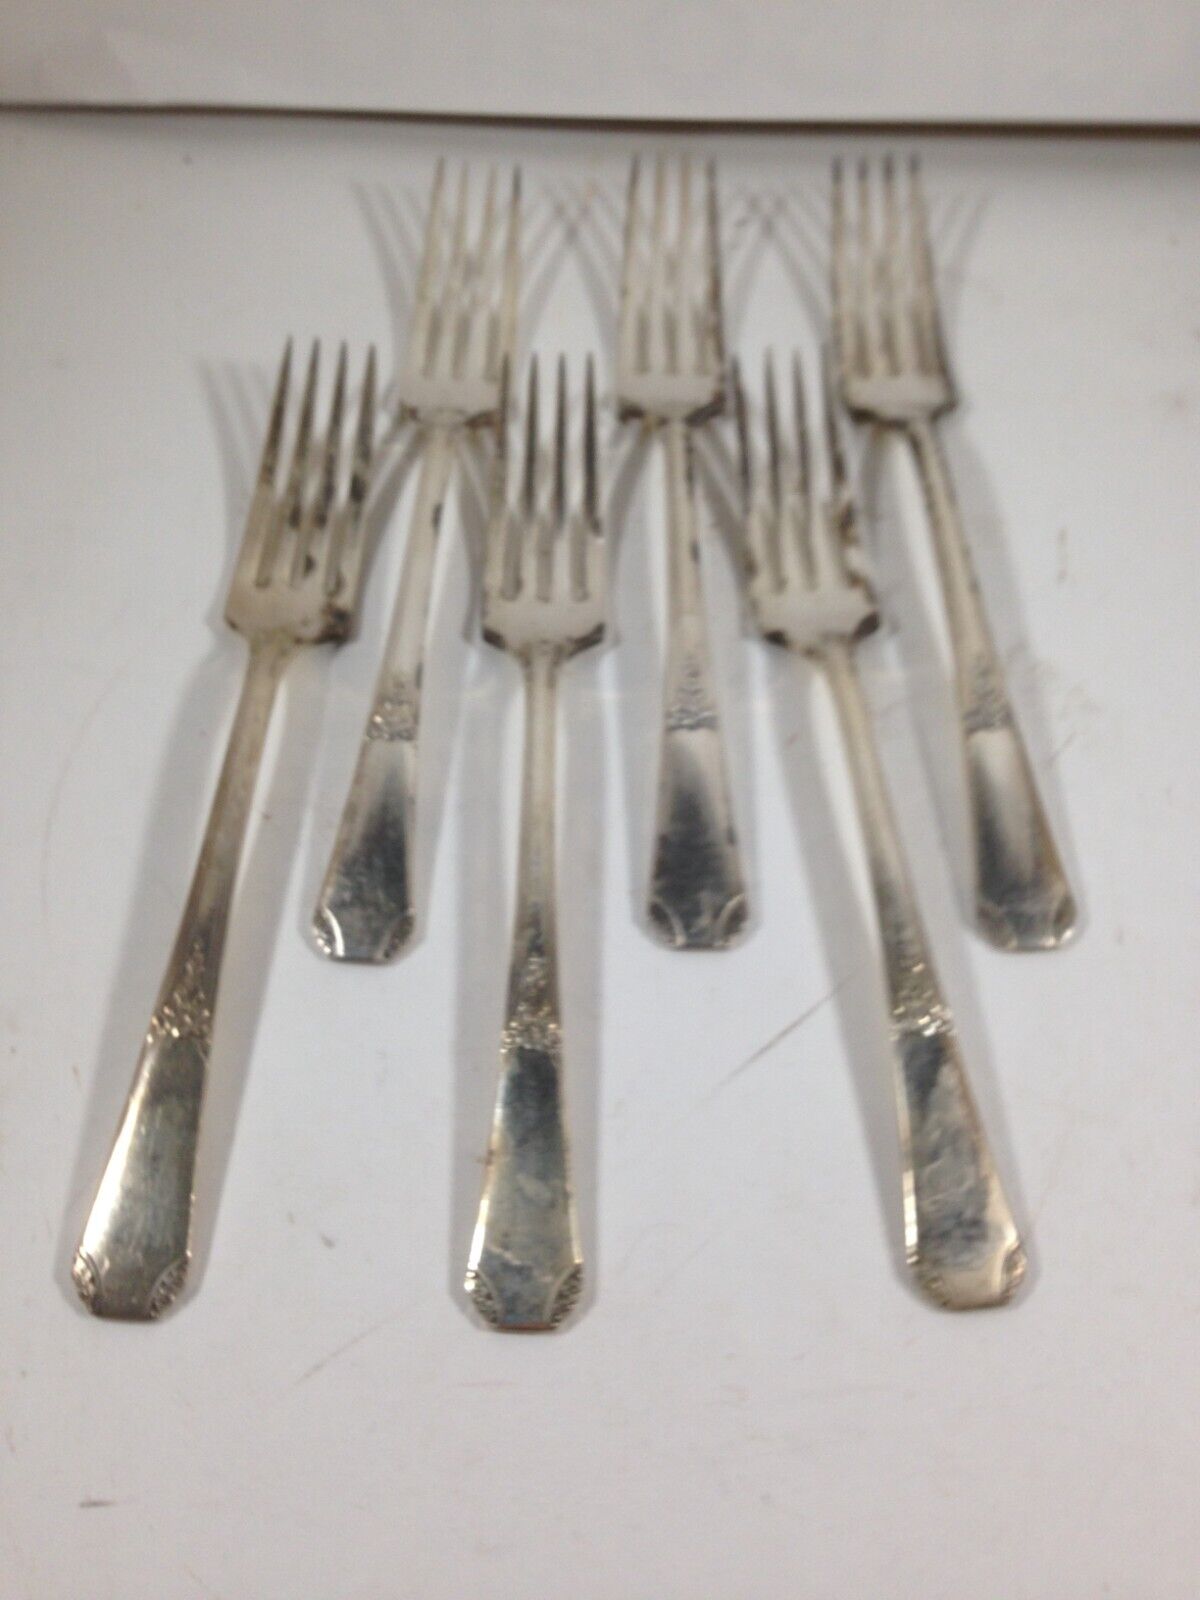 Set of 6 Vintage WM Rogers Oneida Sectional RIO Silverplate Dinner Forks